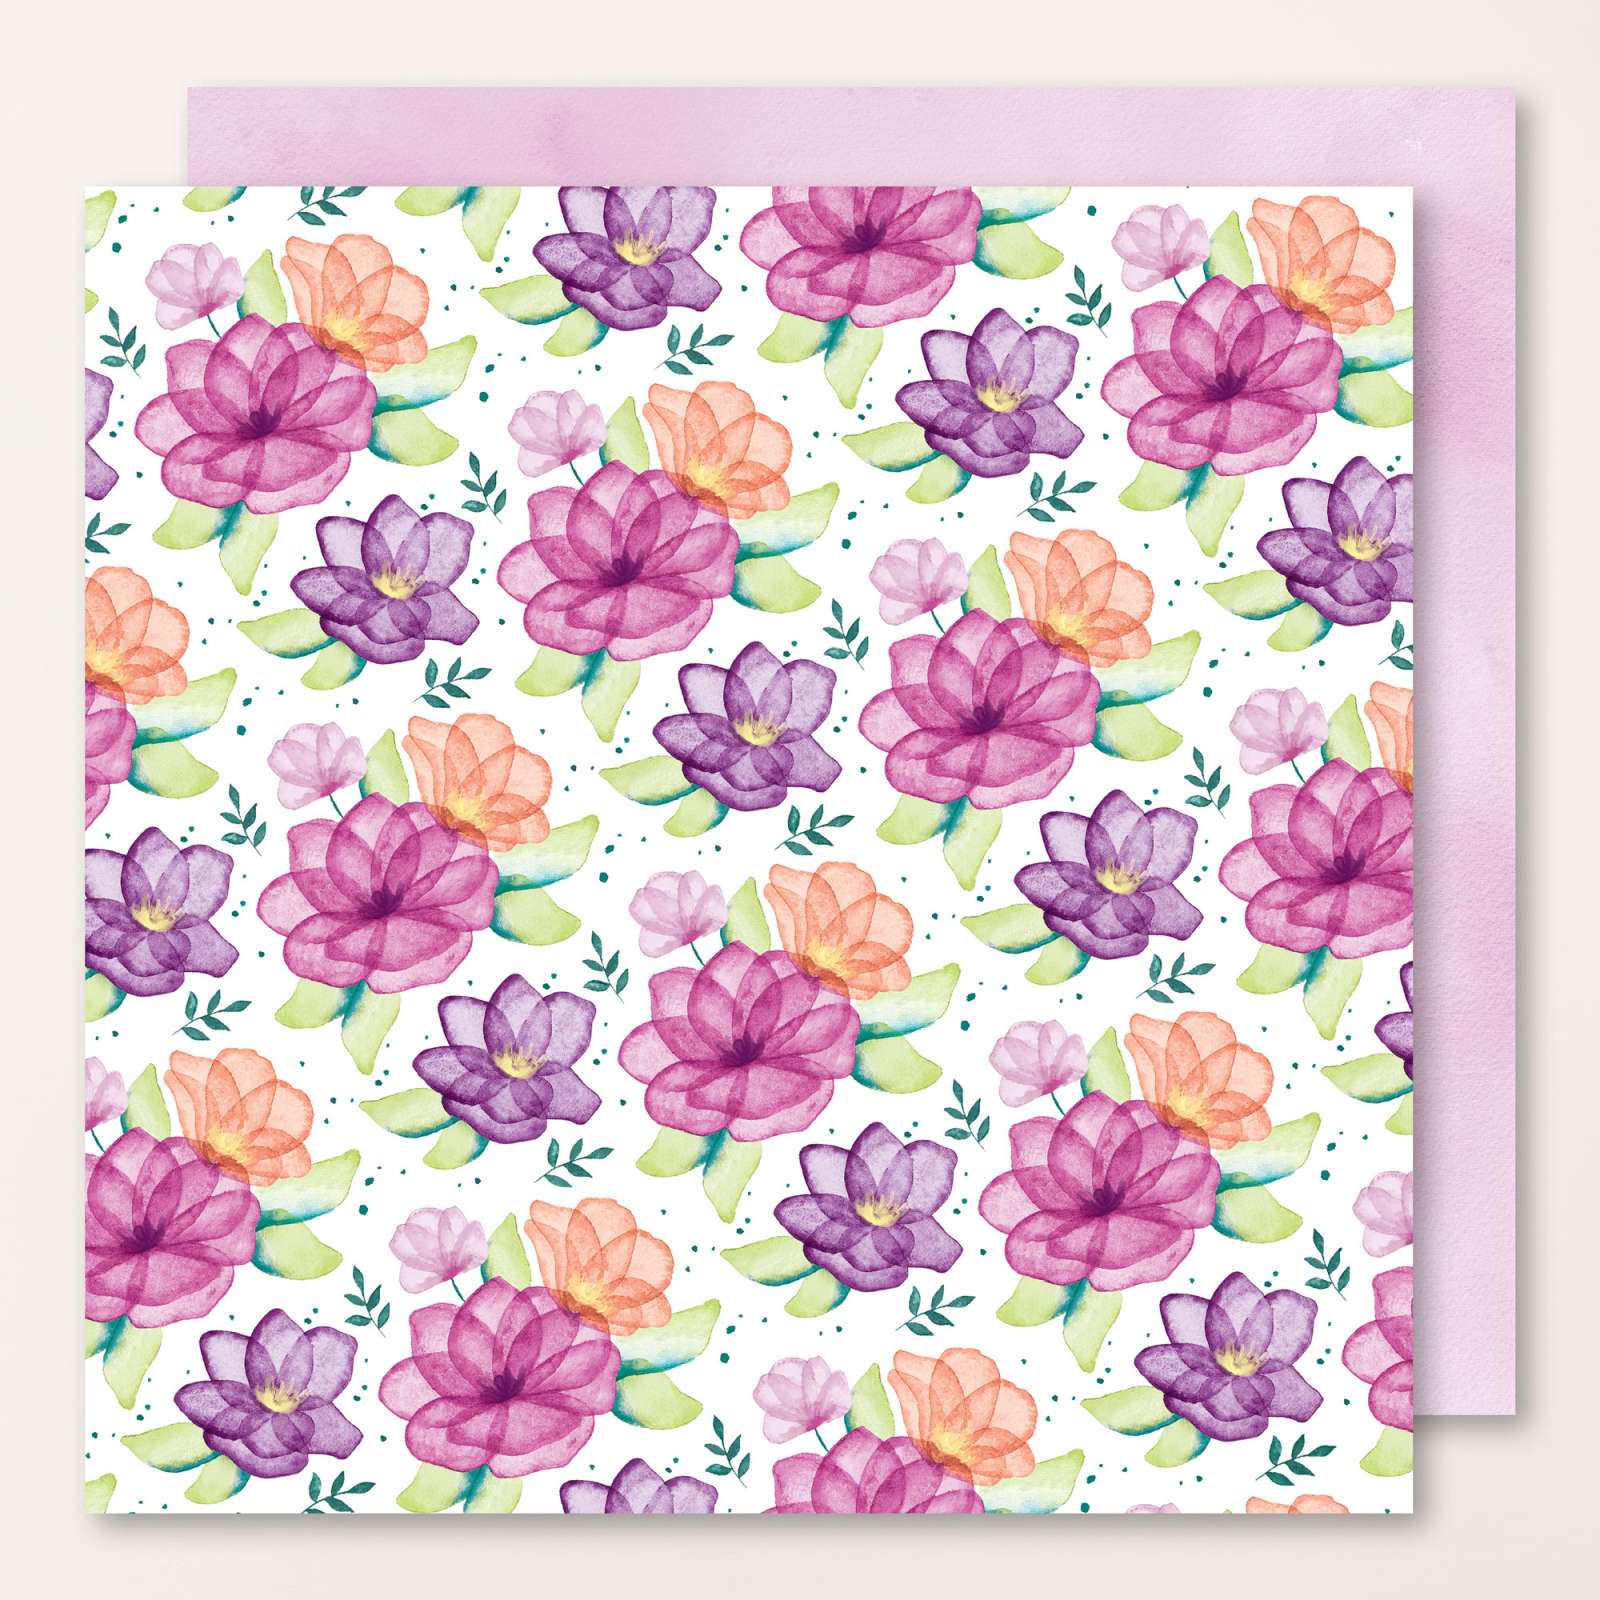 Delightful Floral 12 x 12 (30.5 x 30.5 cm) Designer Series Paper by  Stampin' Up!